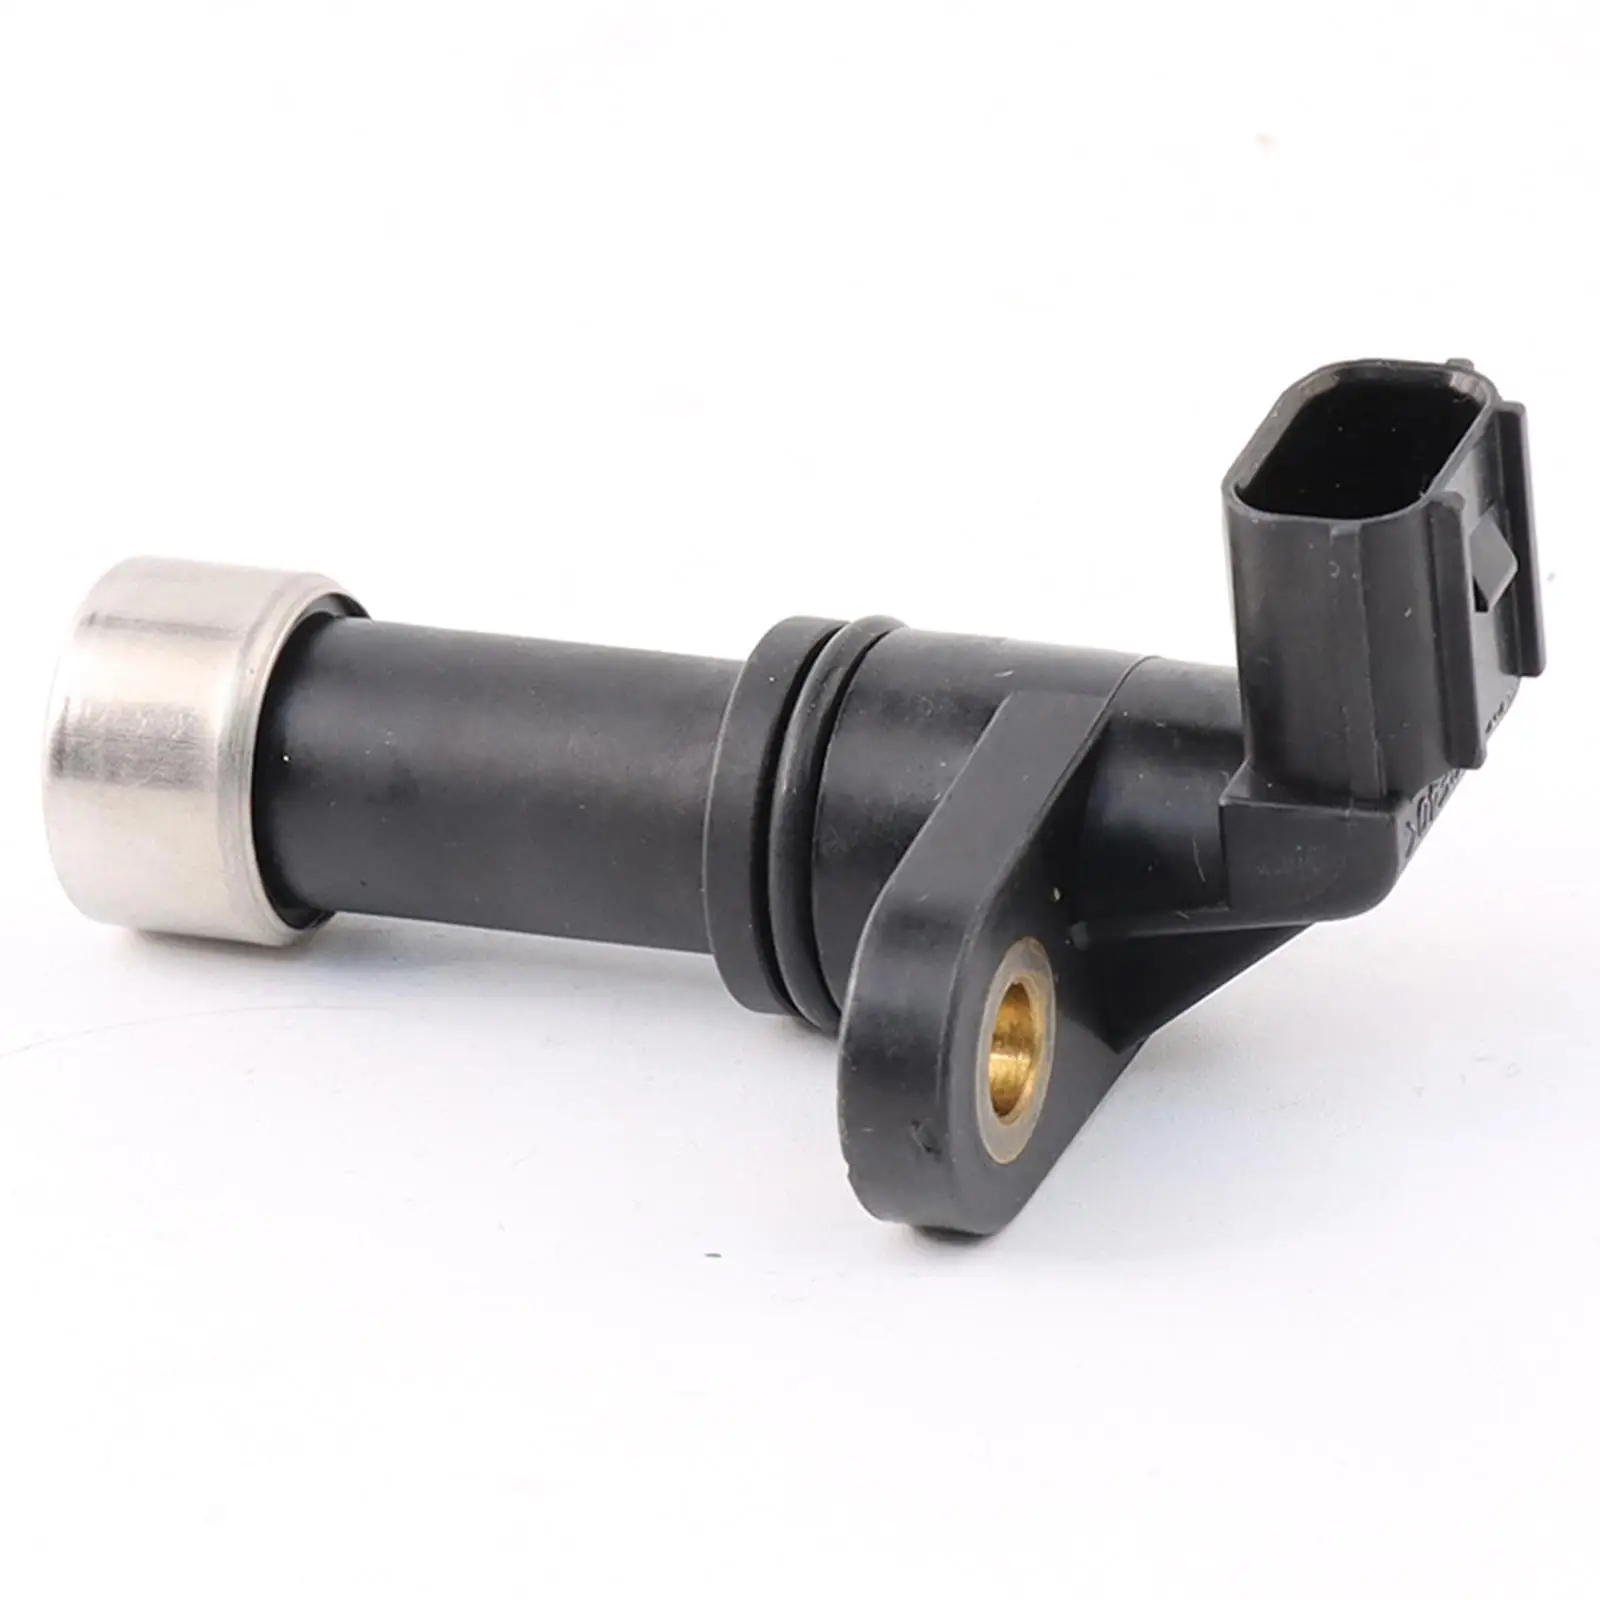 Car Trans Speed Sensor 28810-Rpc-013 for Honda Civic Fit Accessories Easy